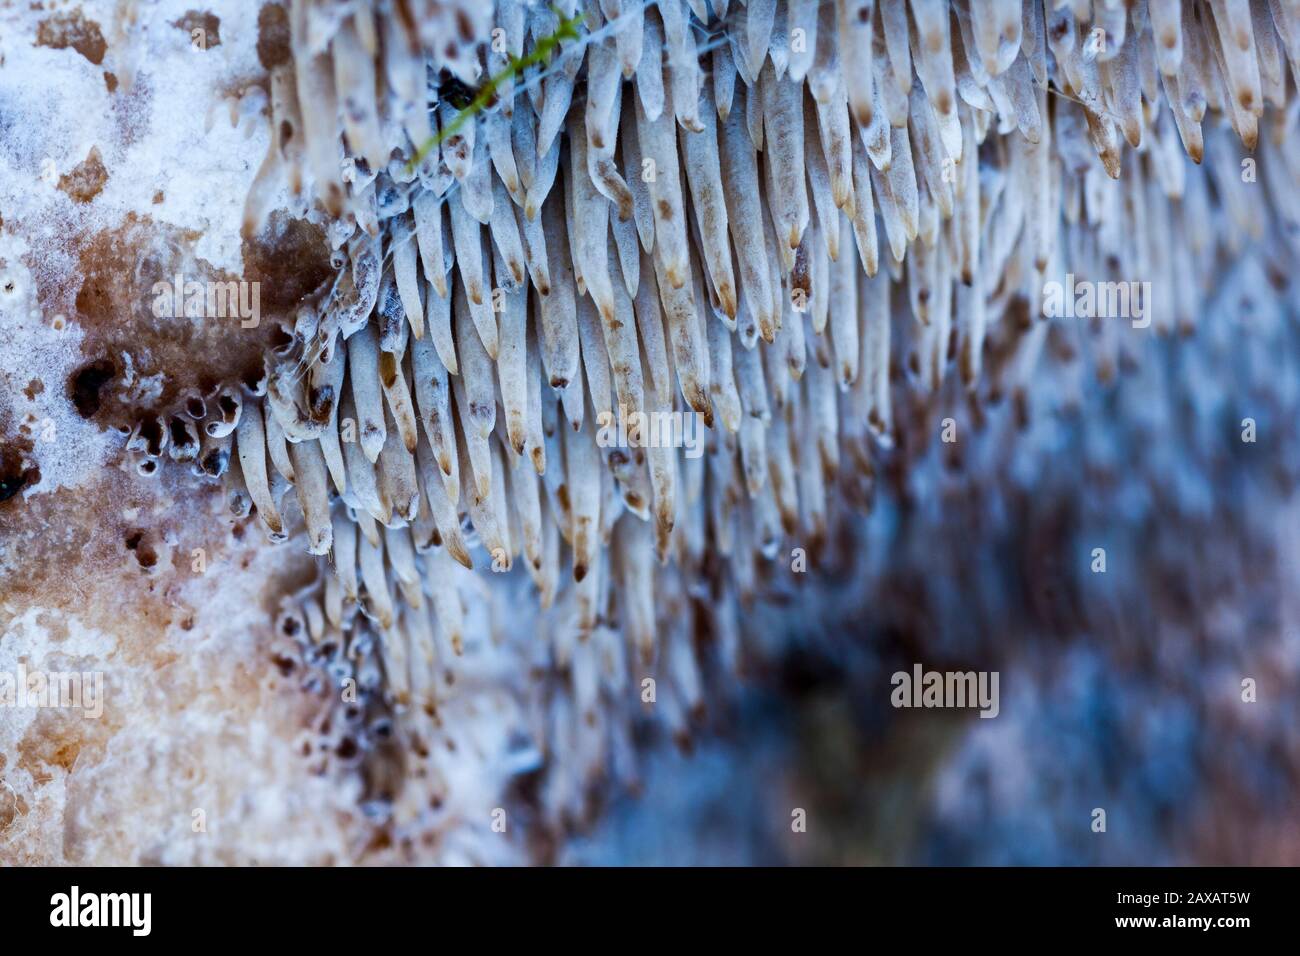 Sarcodon imbricatus, known as squamous hedgehog or flaky tooth. Close-up of the bottom of a fungus. Spain Stock Photo